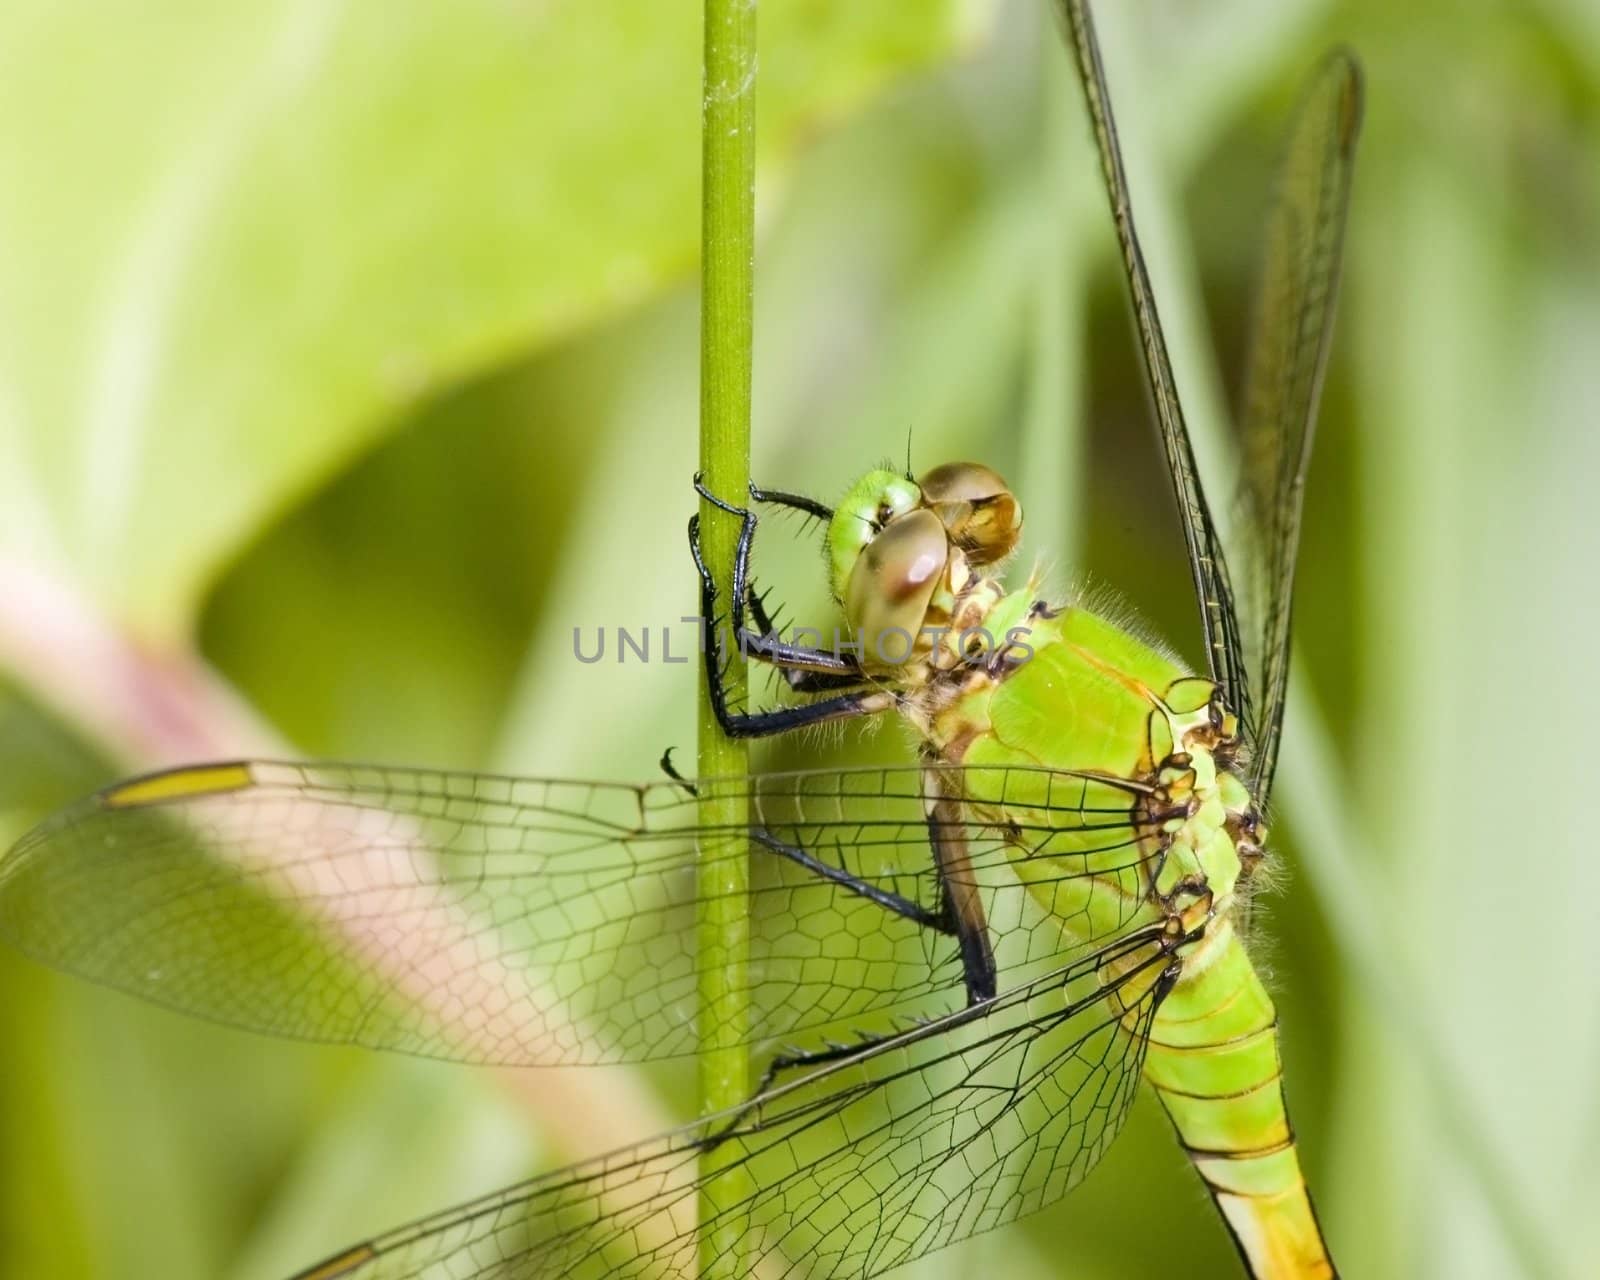 Close-up of a green darner dragonfly perched on a plant stem.